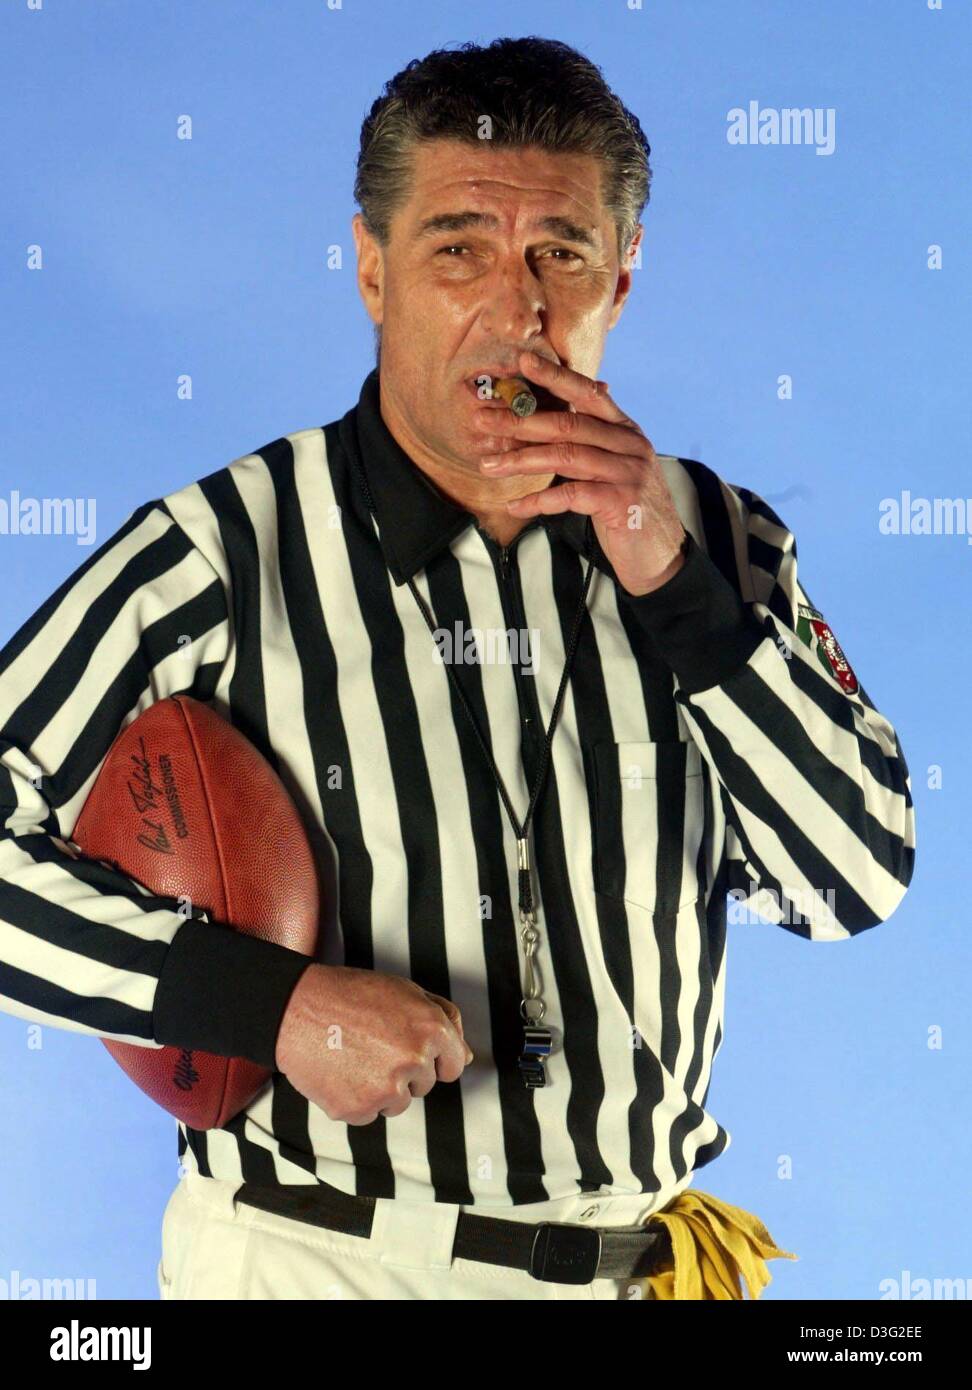 (dpa) - Rudi Assauer, manager of the German soccer club Schalke 04, poses in an American football referee's tricot while smoking a cigar and holding a football in his arm during a photoshoot for the American football club Rhein Fire in a studio in Mettmann, Germany, 12 March 2003. The American football club Rhein Fire will play its home games on the home pitch of the Schalke 04 soc Stock Photo